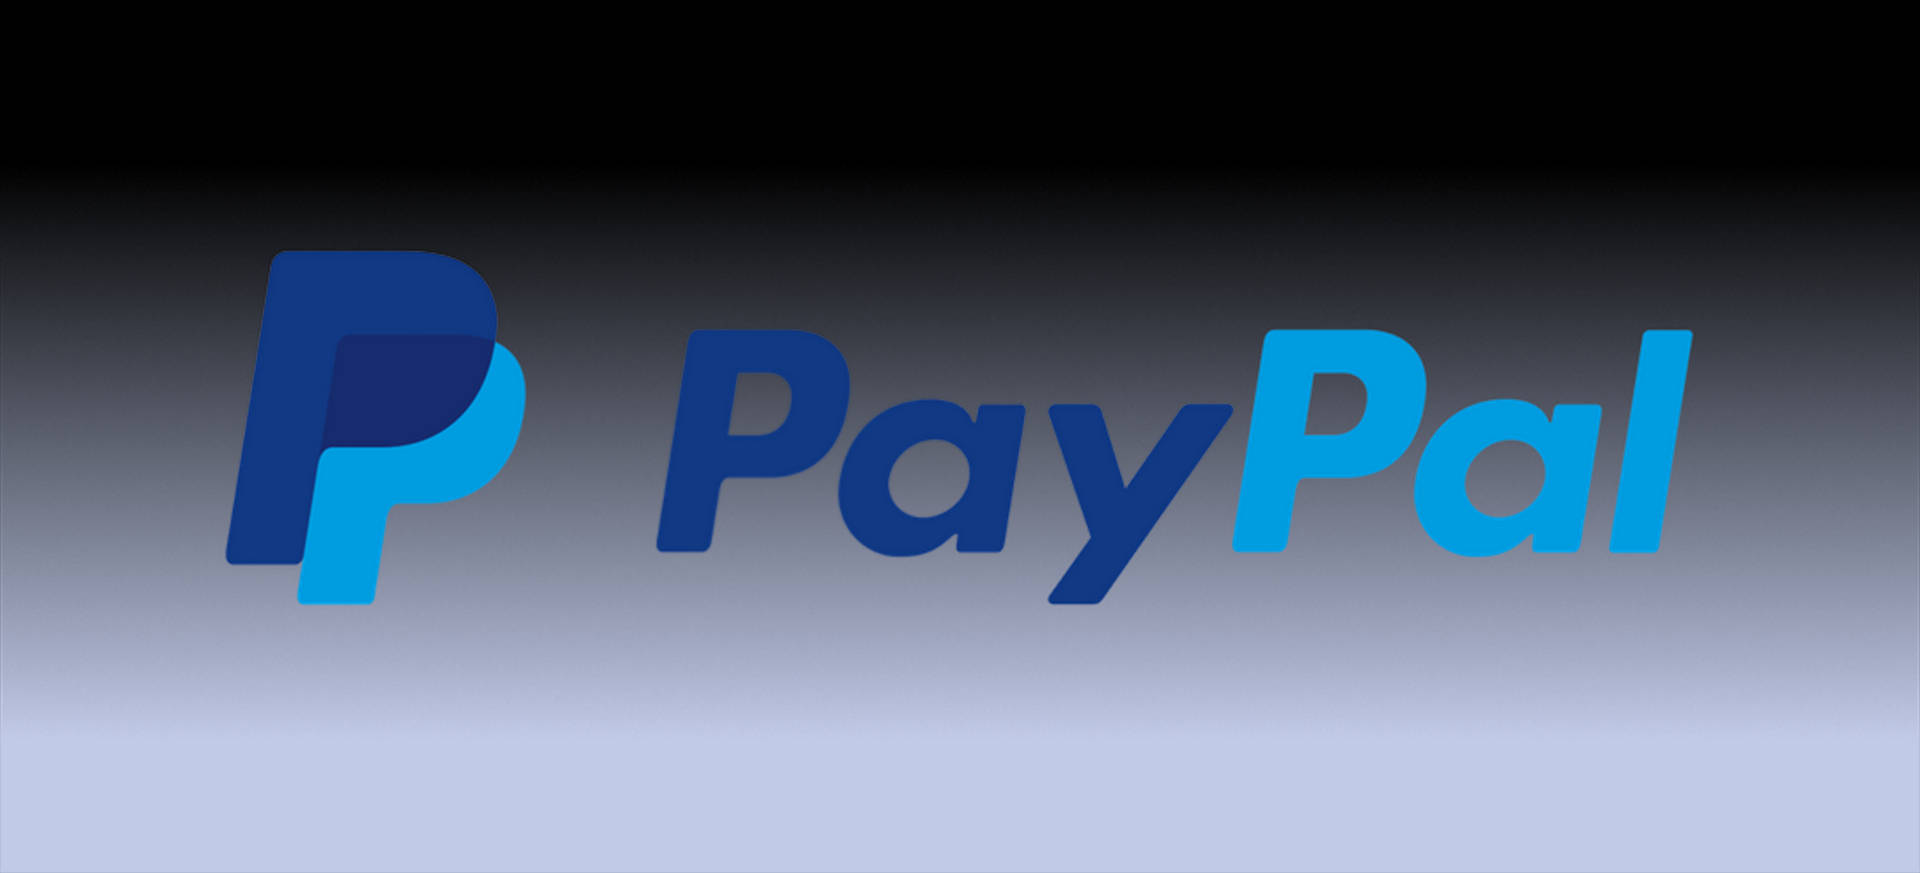 Paypal Logo Gray Gradient Background